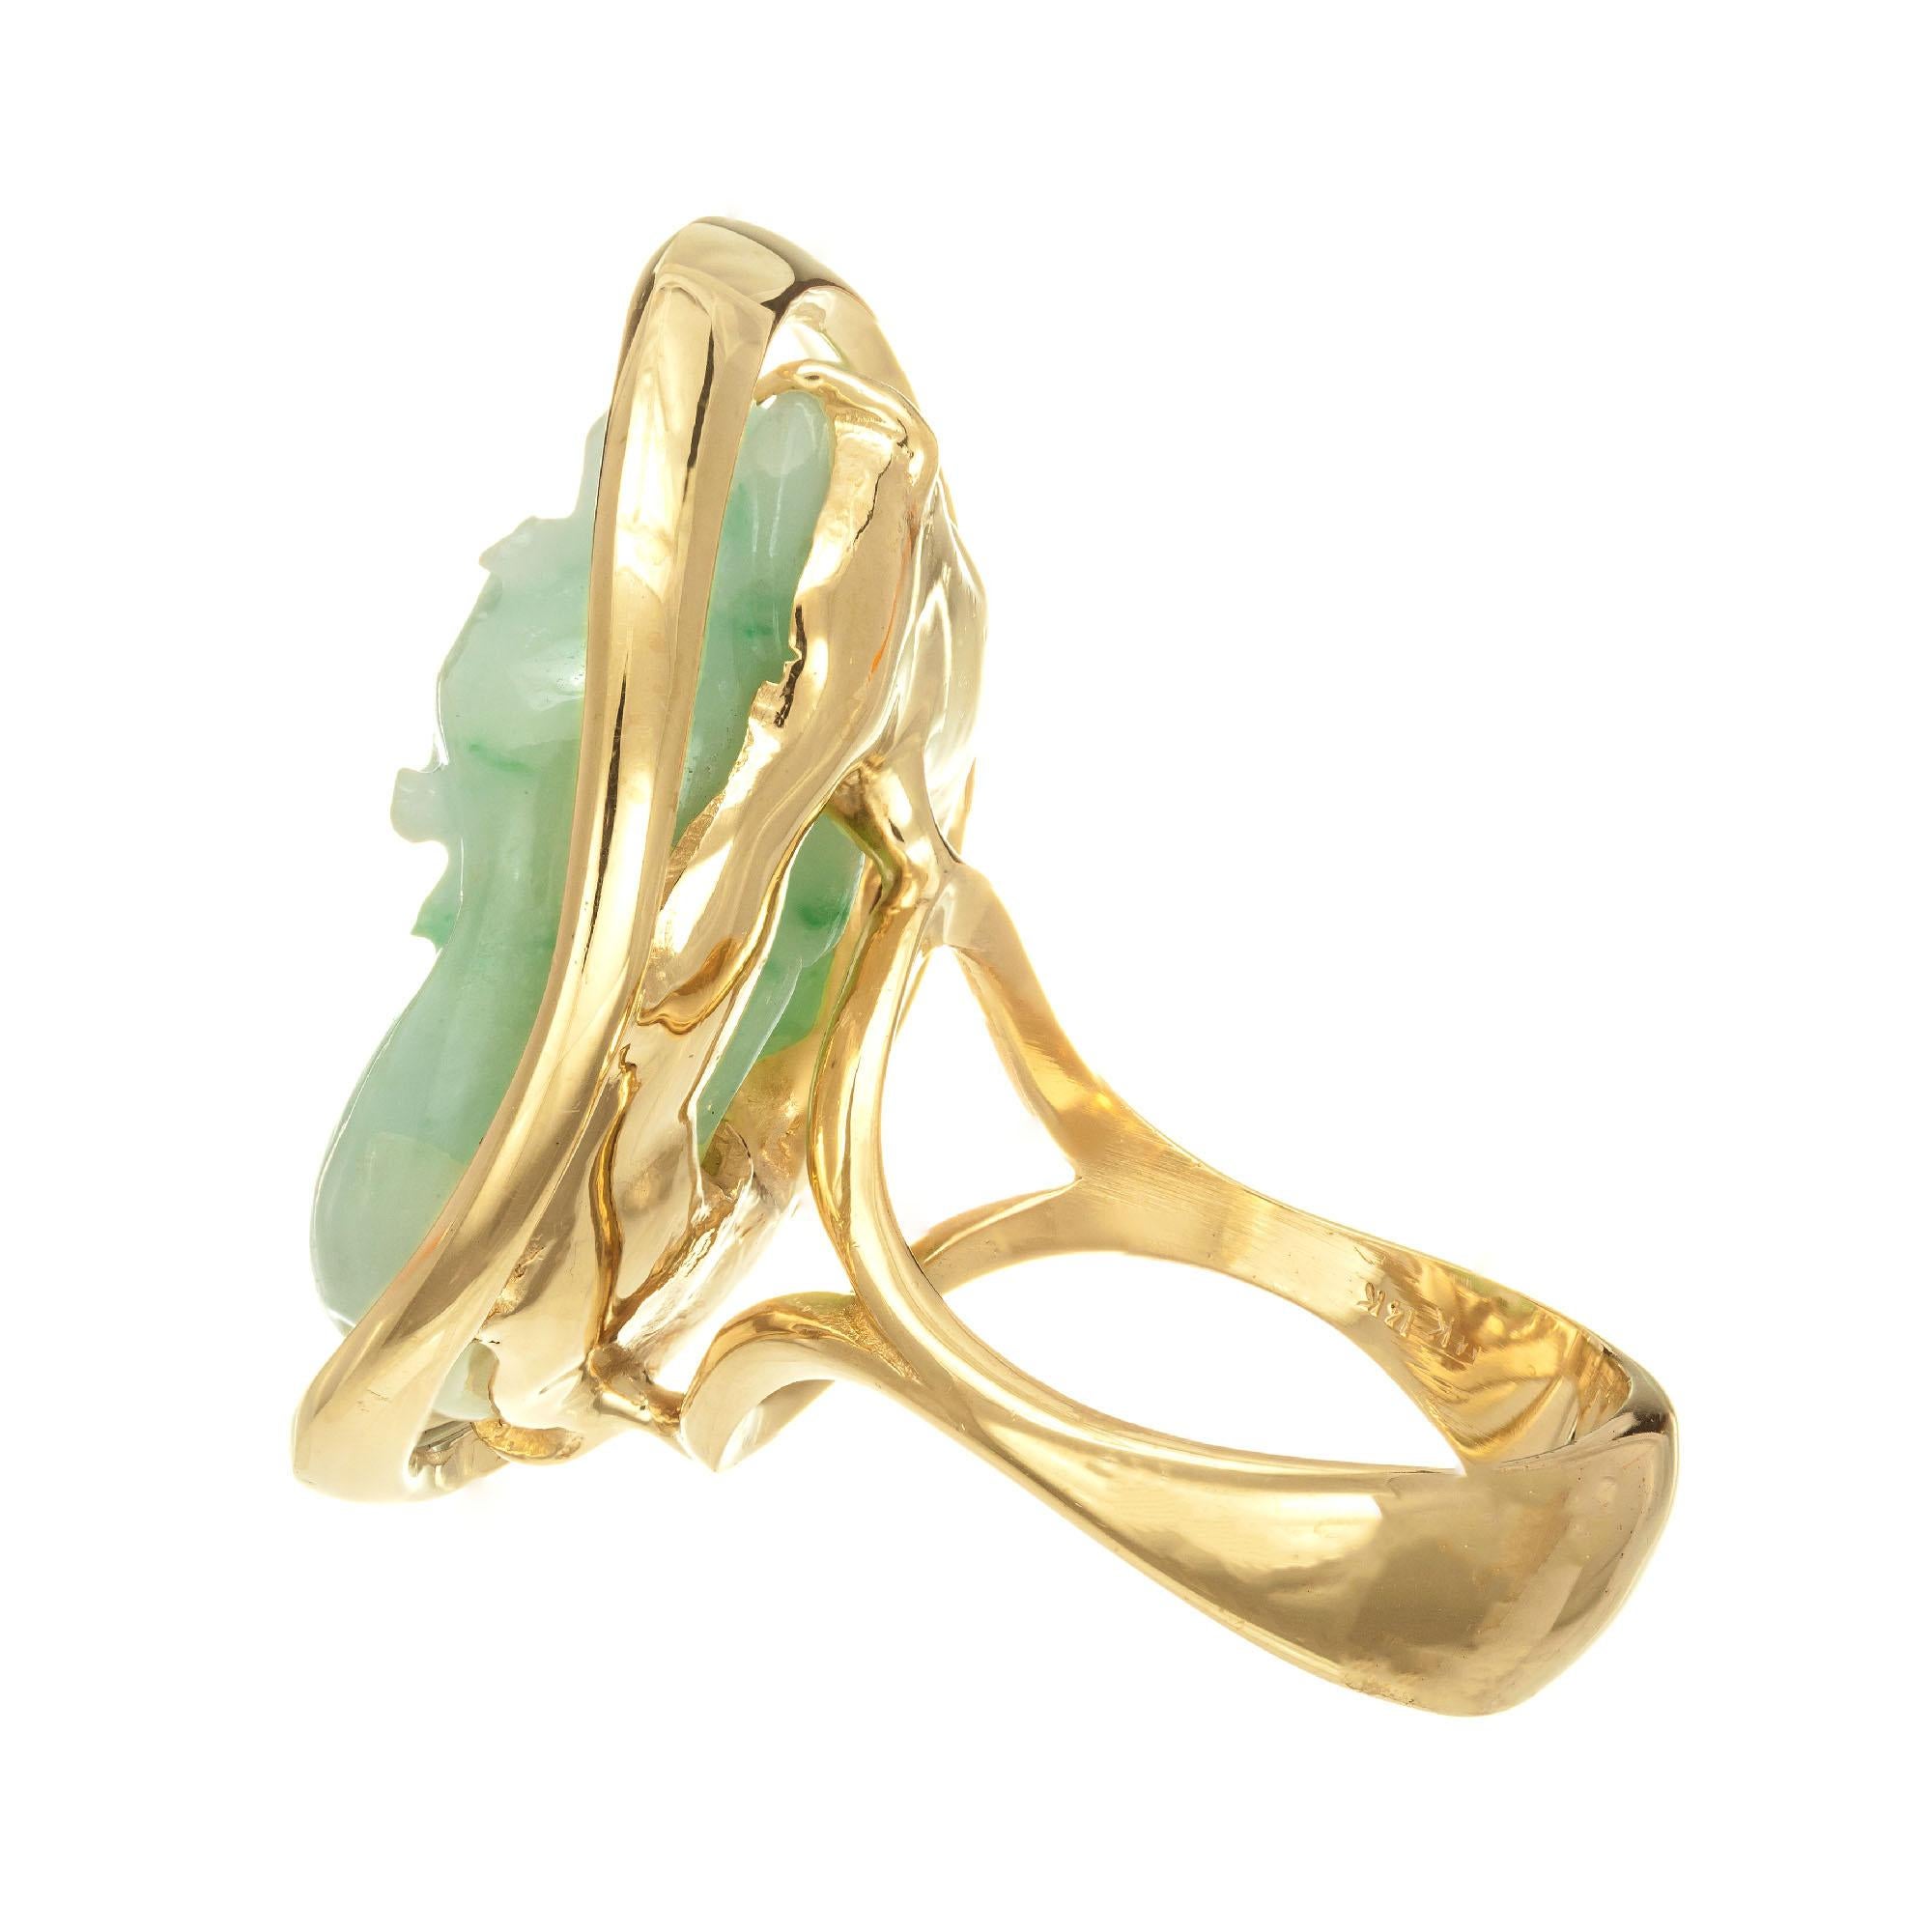 Natural untreated carved double cat Jadeite Jade cocktail ring. GIA certified. 14k yellow gold. 

1 pierced carving mottled green jadeite jade GIA Certificate # 5201517947
Size 11.75 and sizable
14k yellow gold 
Stamped: 14k
27.5 grams


